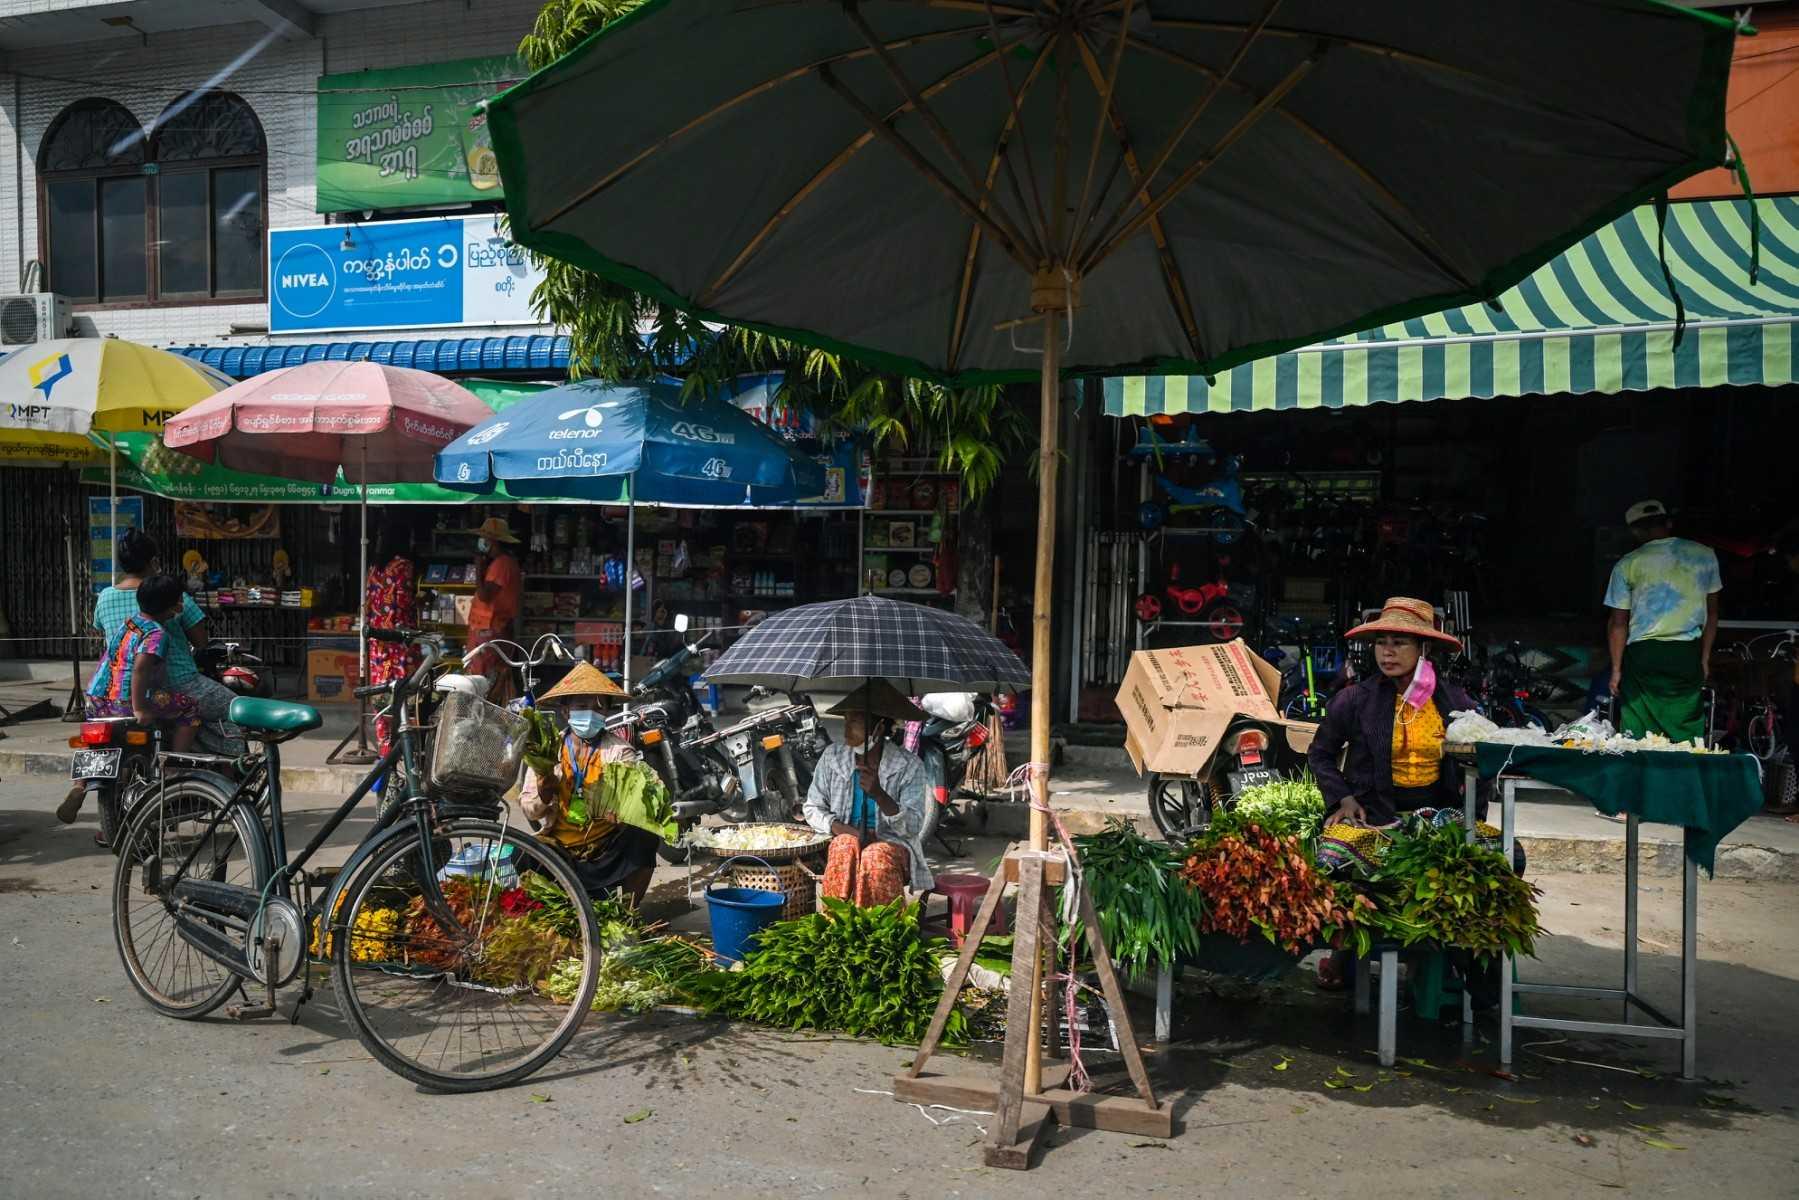 This photo taken on Oct 10, 2021 shows street vendors selling vegetables on a street in Shwebo township in Sagaing region. Photo: AFP